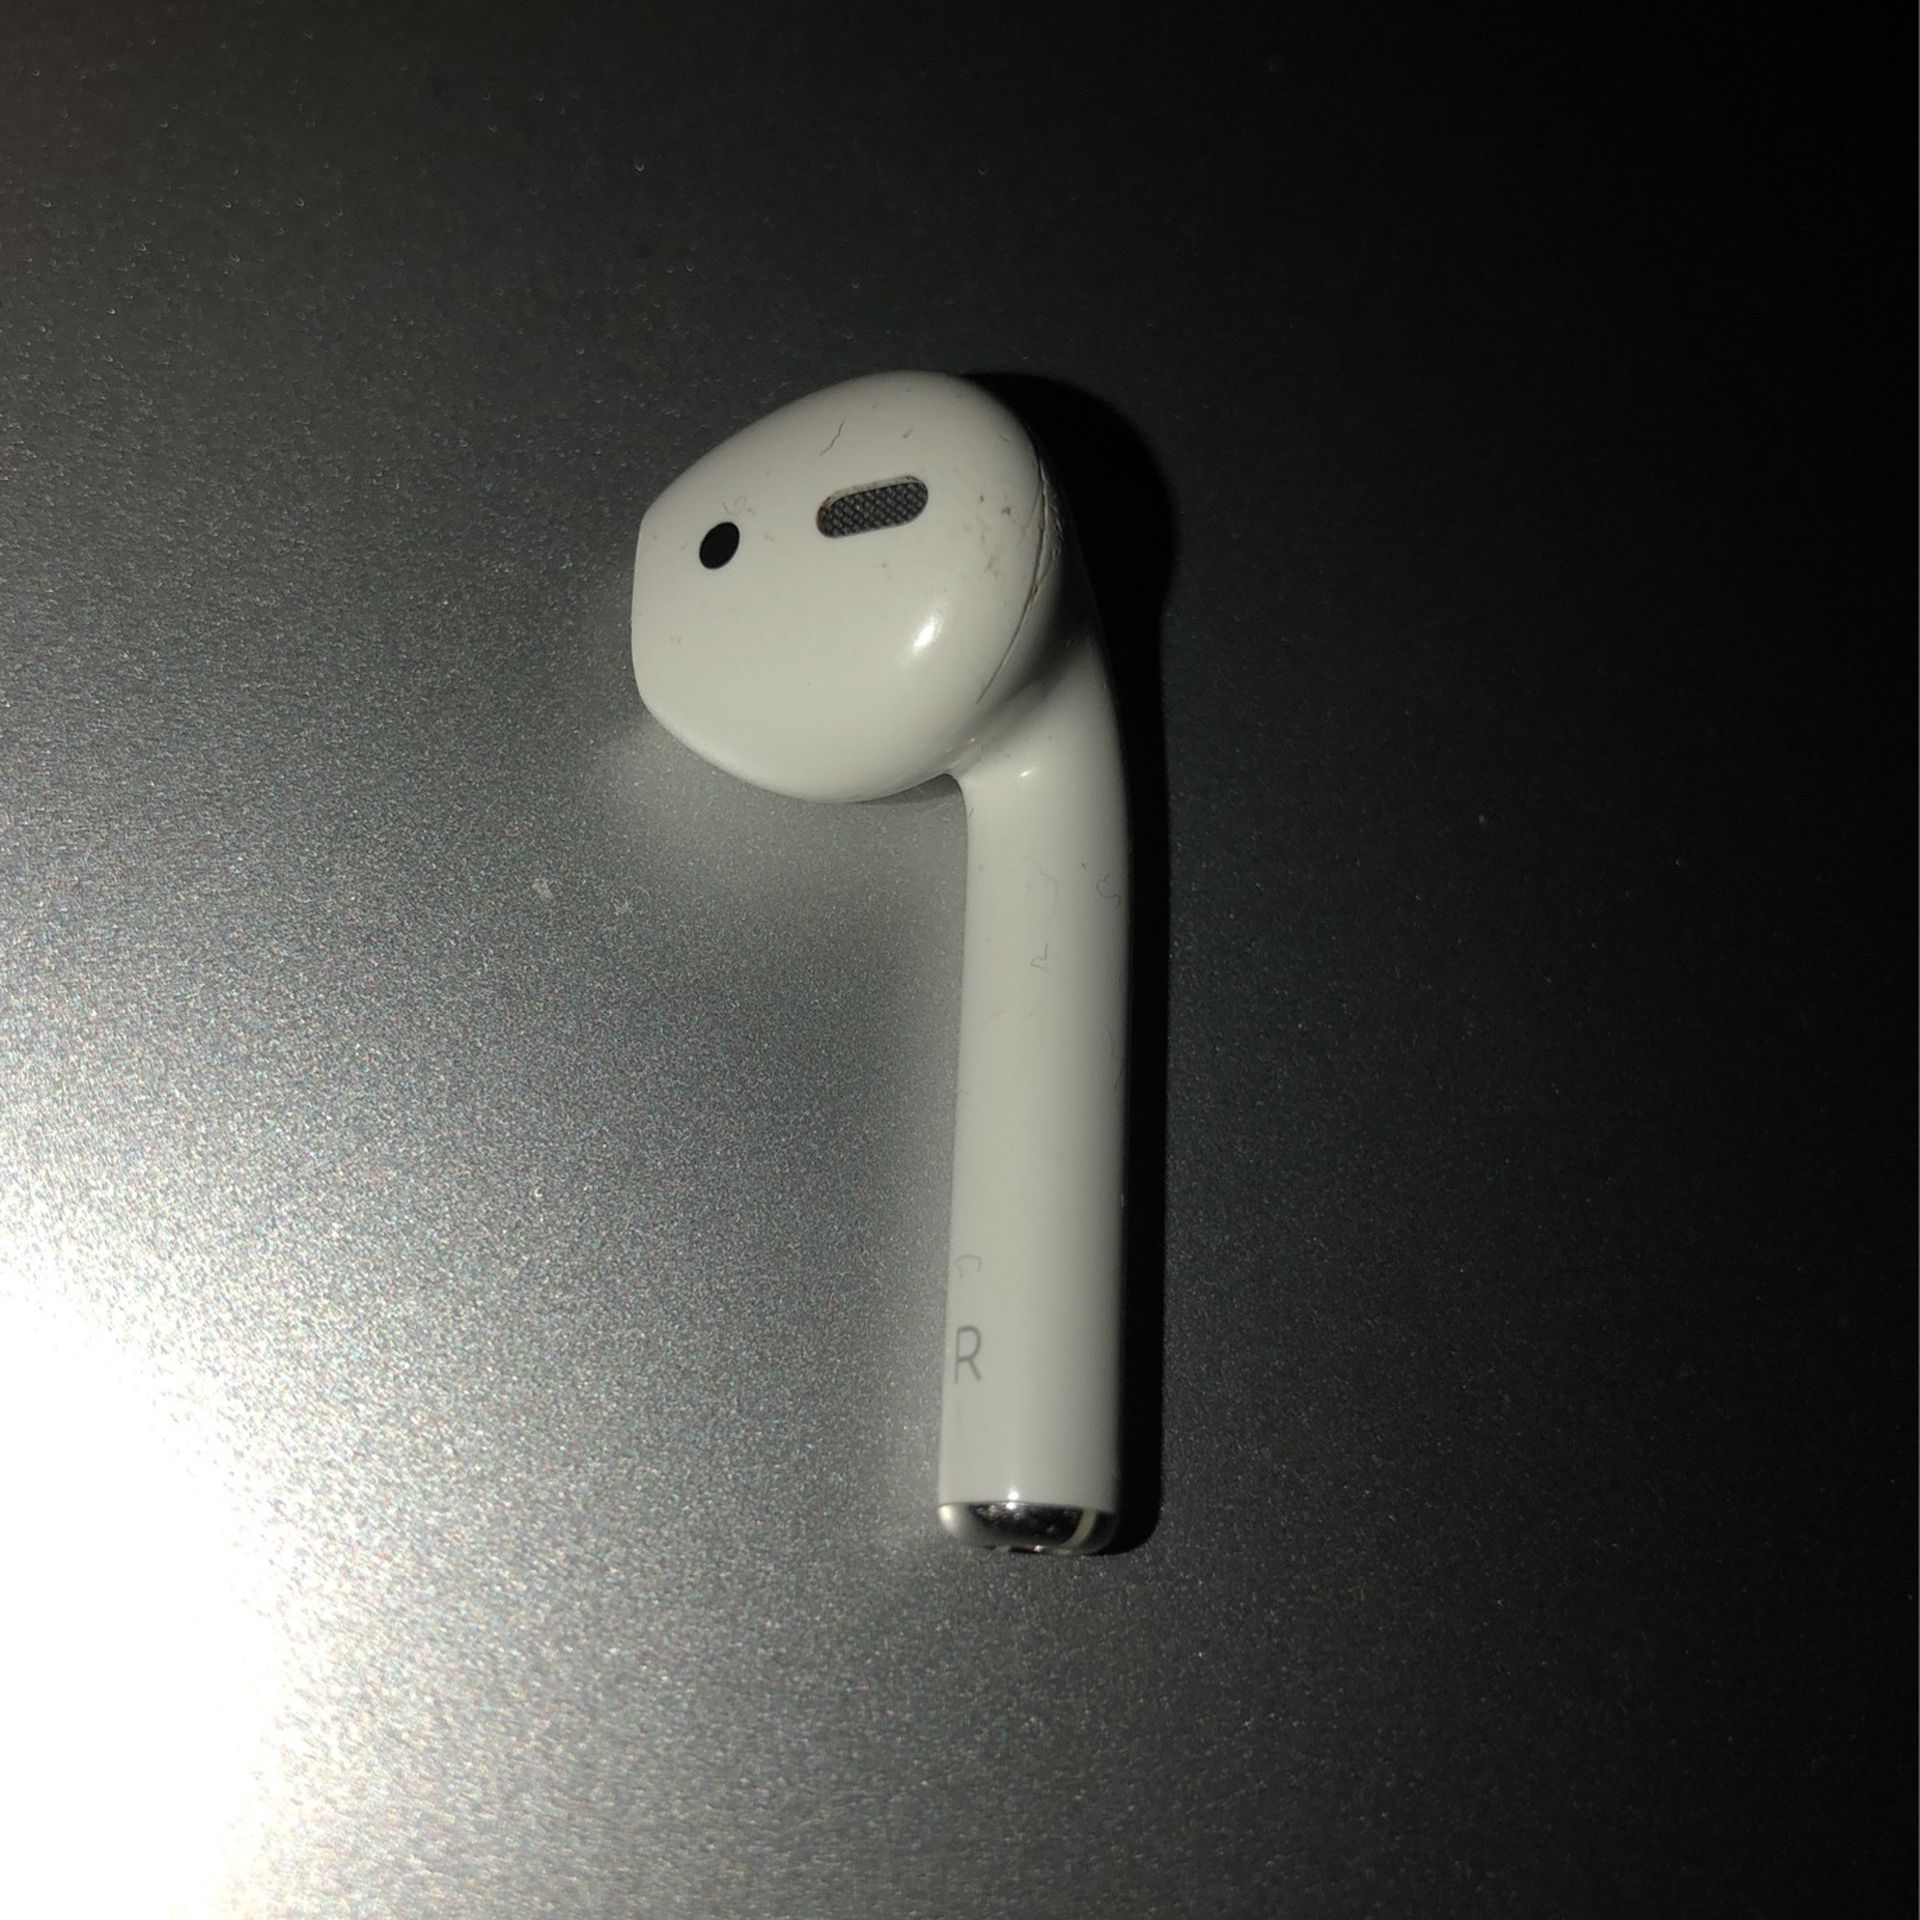 Apple airpod 1st generation right side only